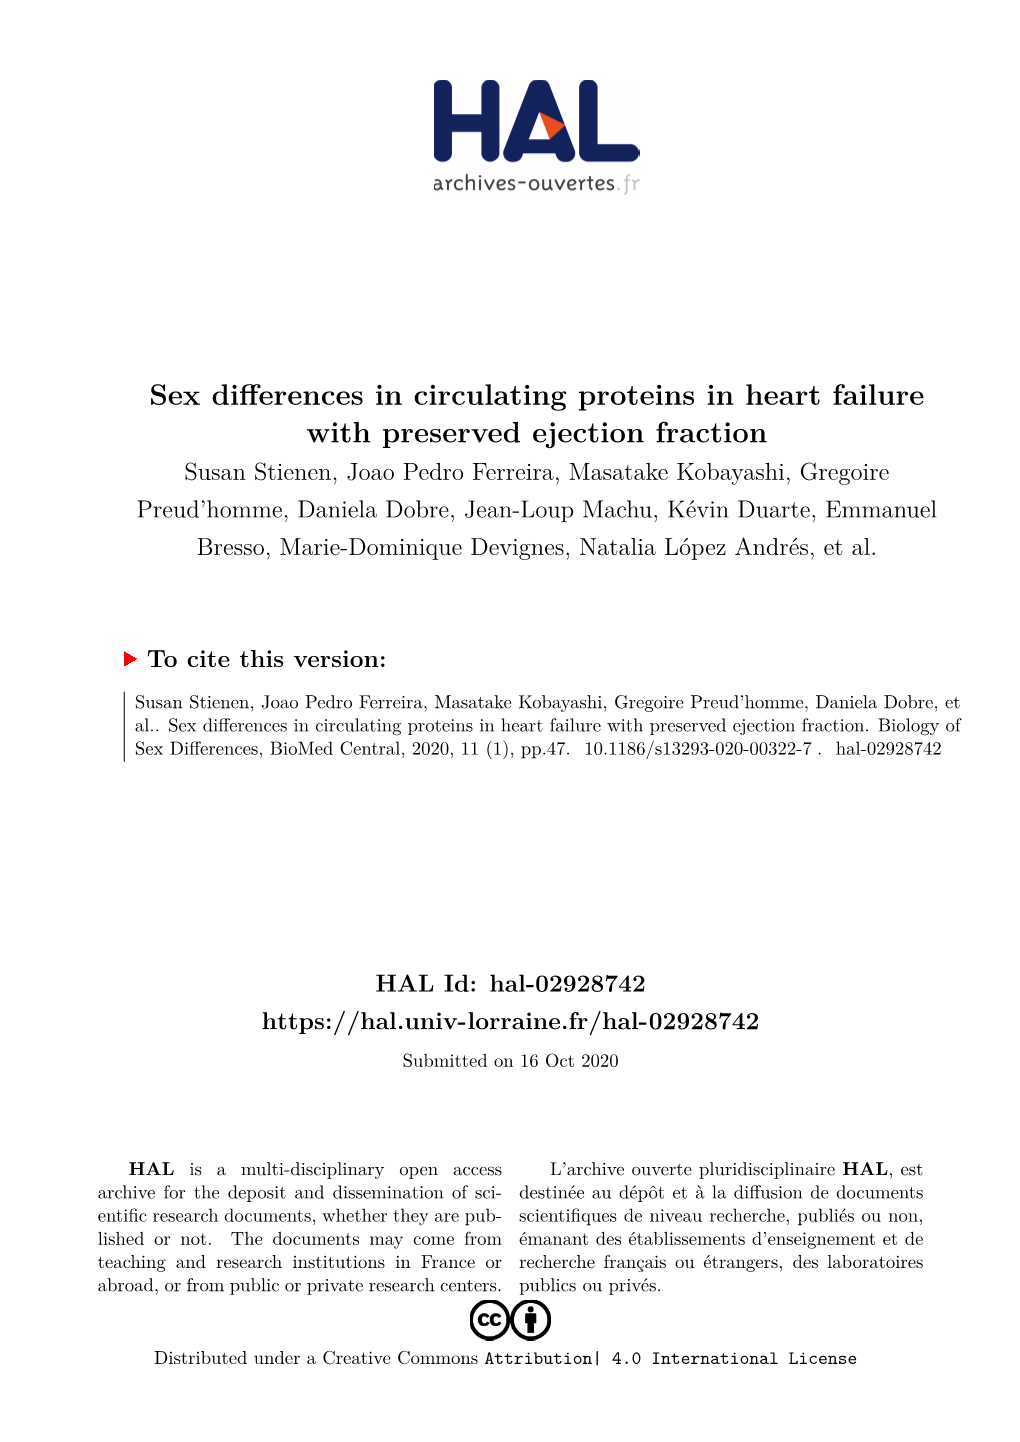 Sex Differences in Circulating Proteins in Heart Failure with Preserved